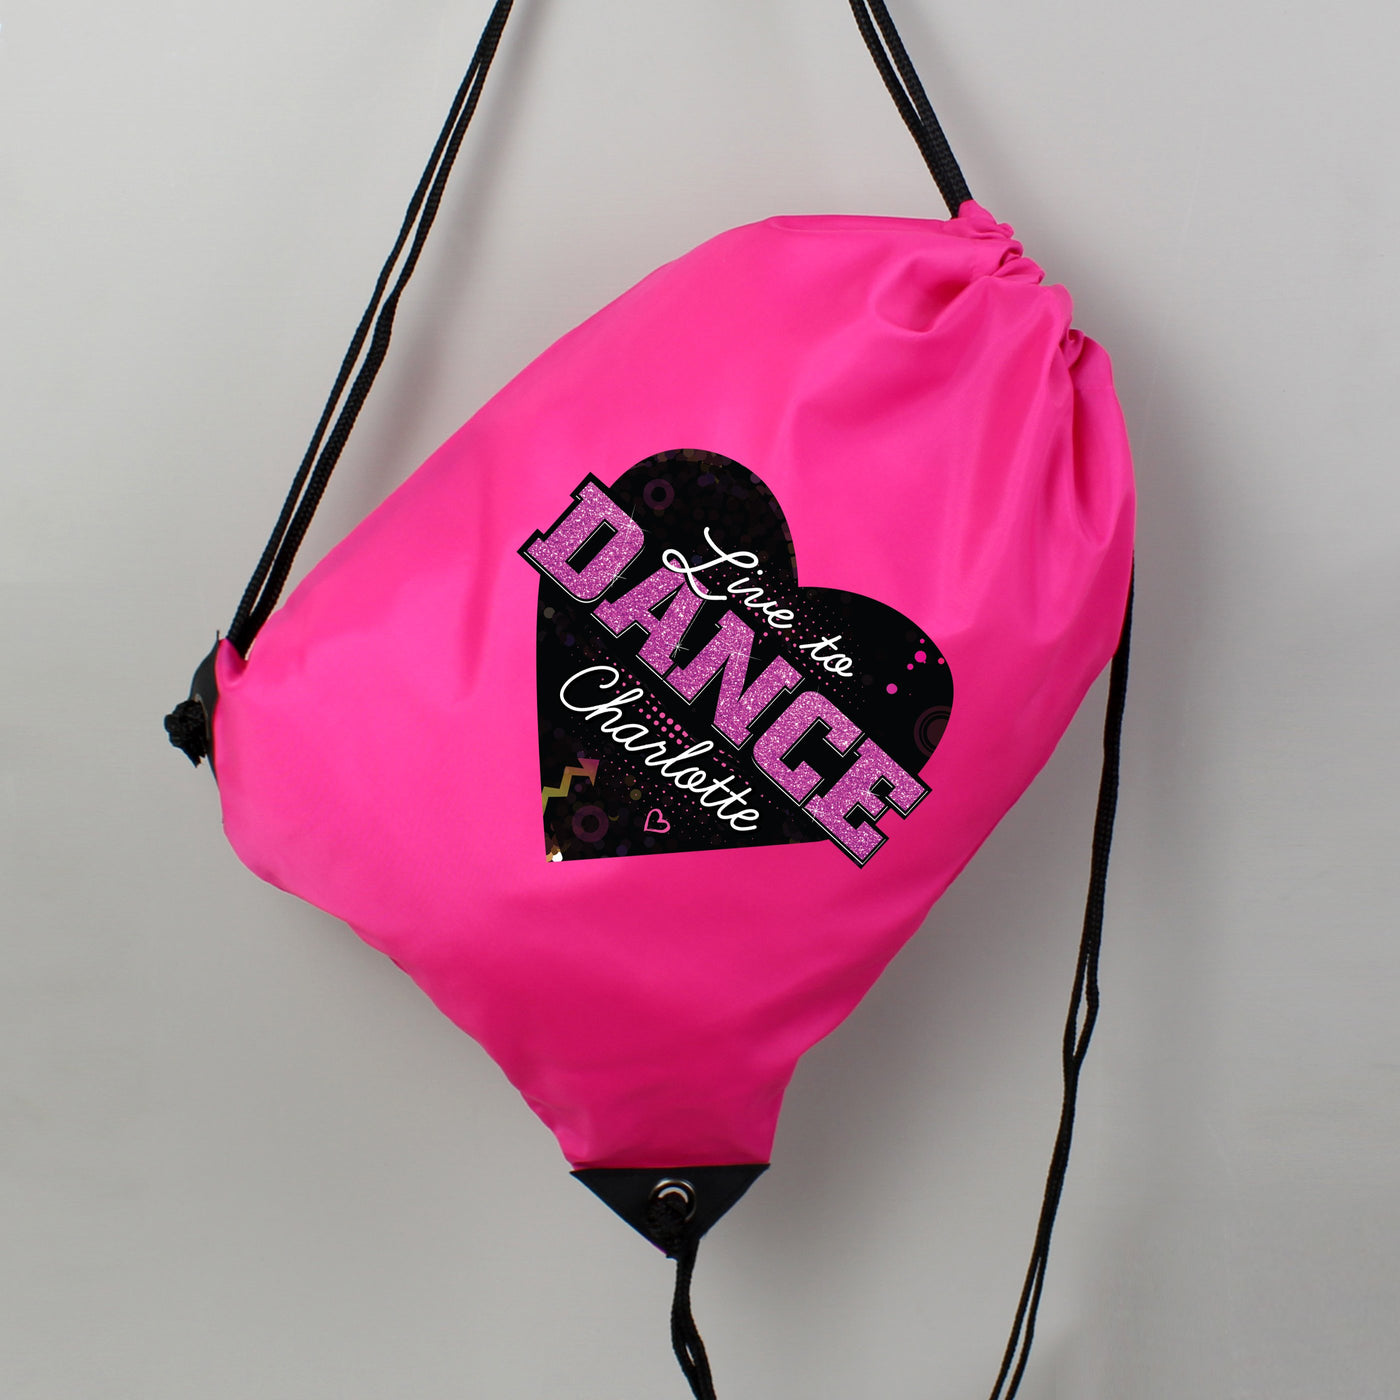 Personalised 'Live to Dance' Pink Kit Bag - Shop Personalised Gifts